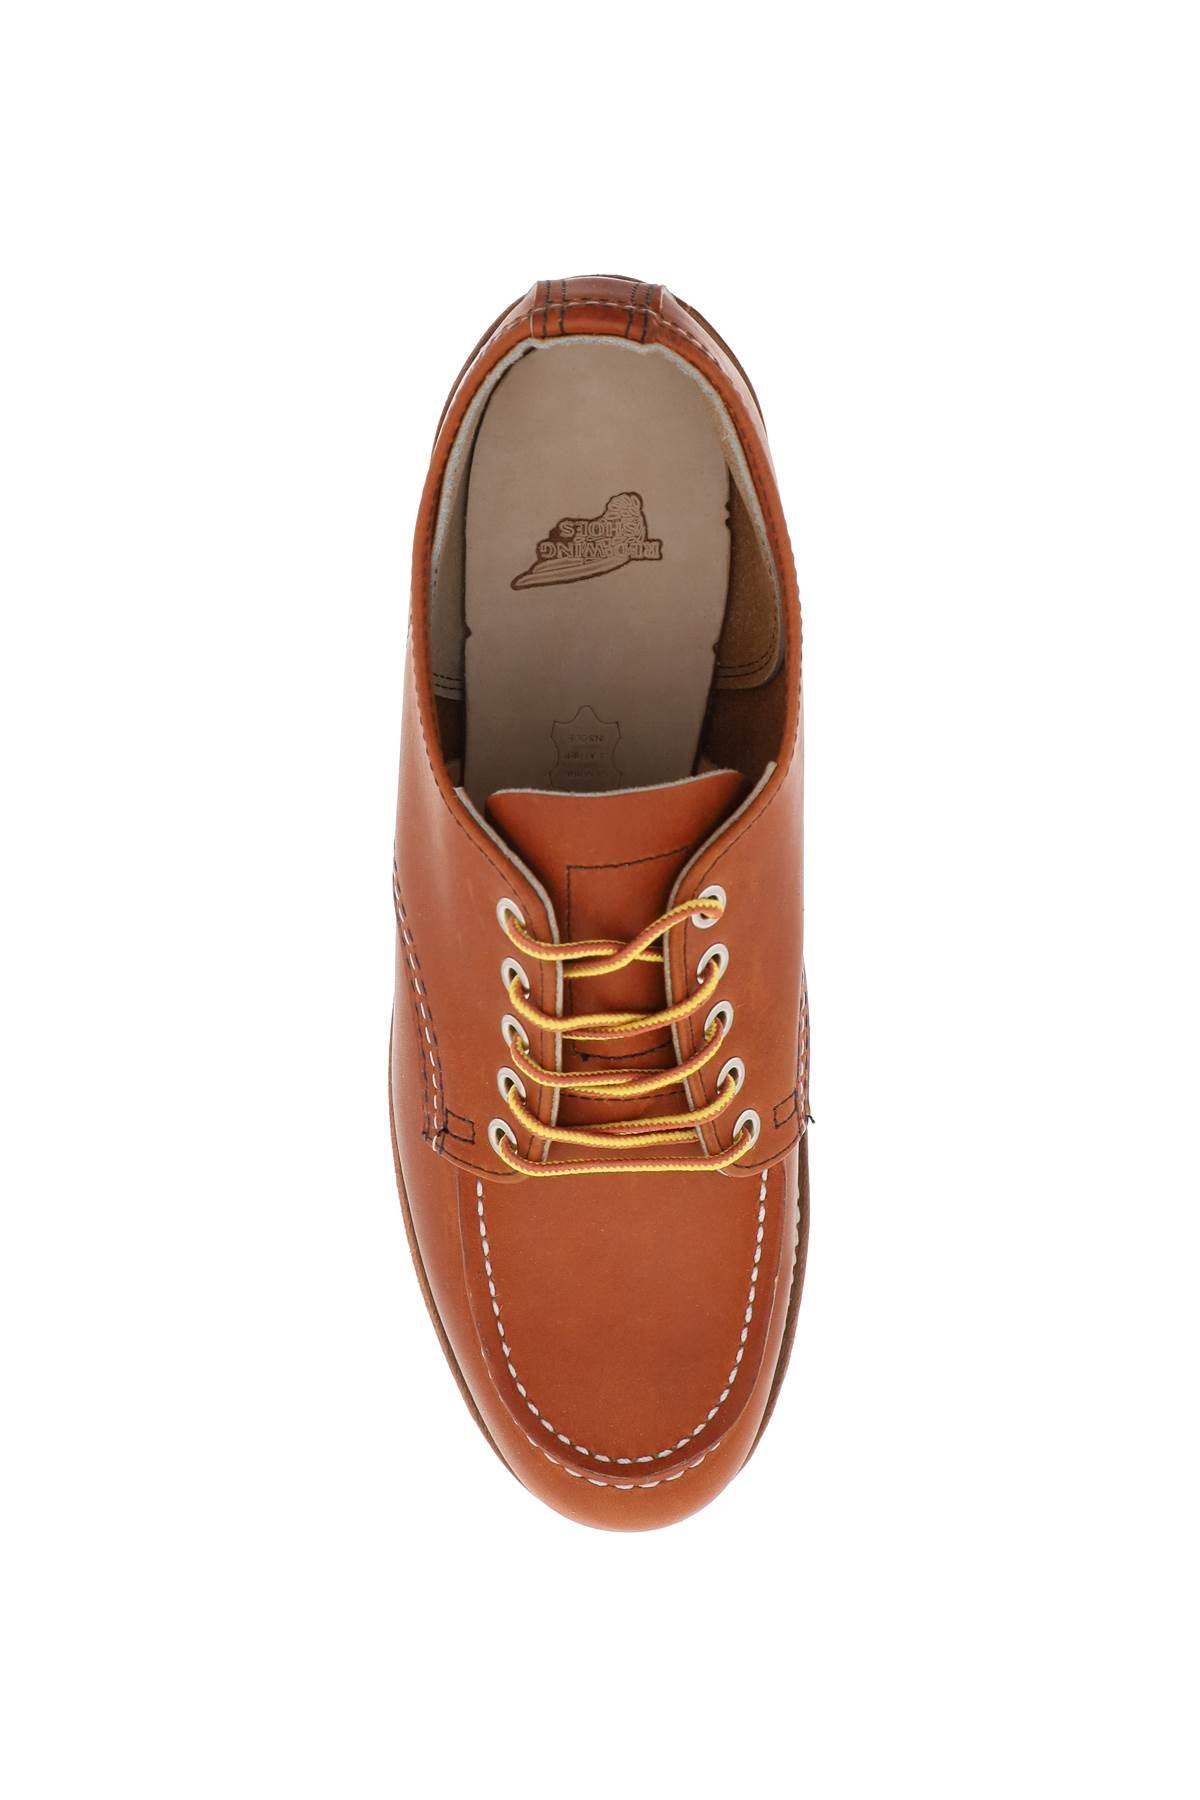 Red wing shoes laced moc toe oxford-1